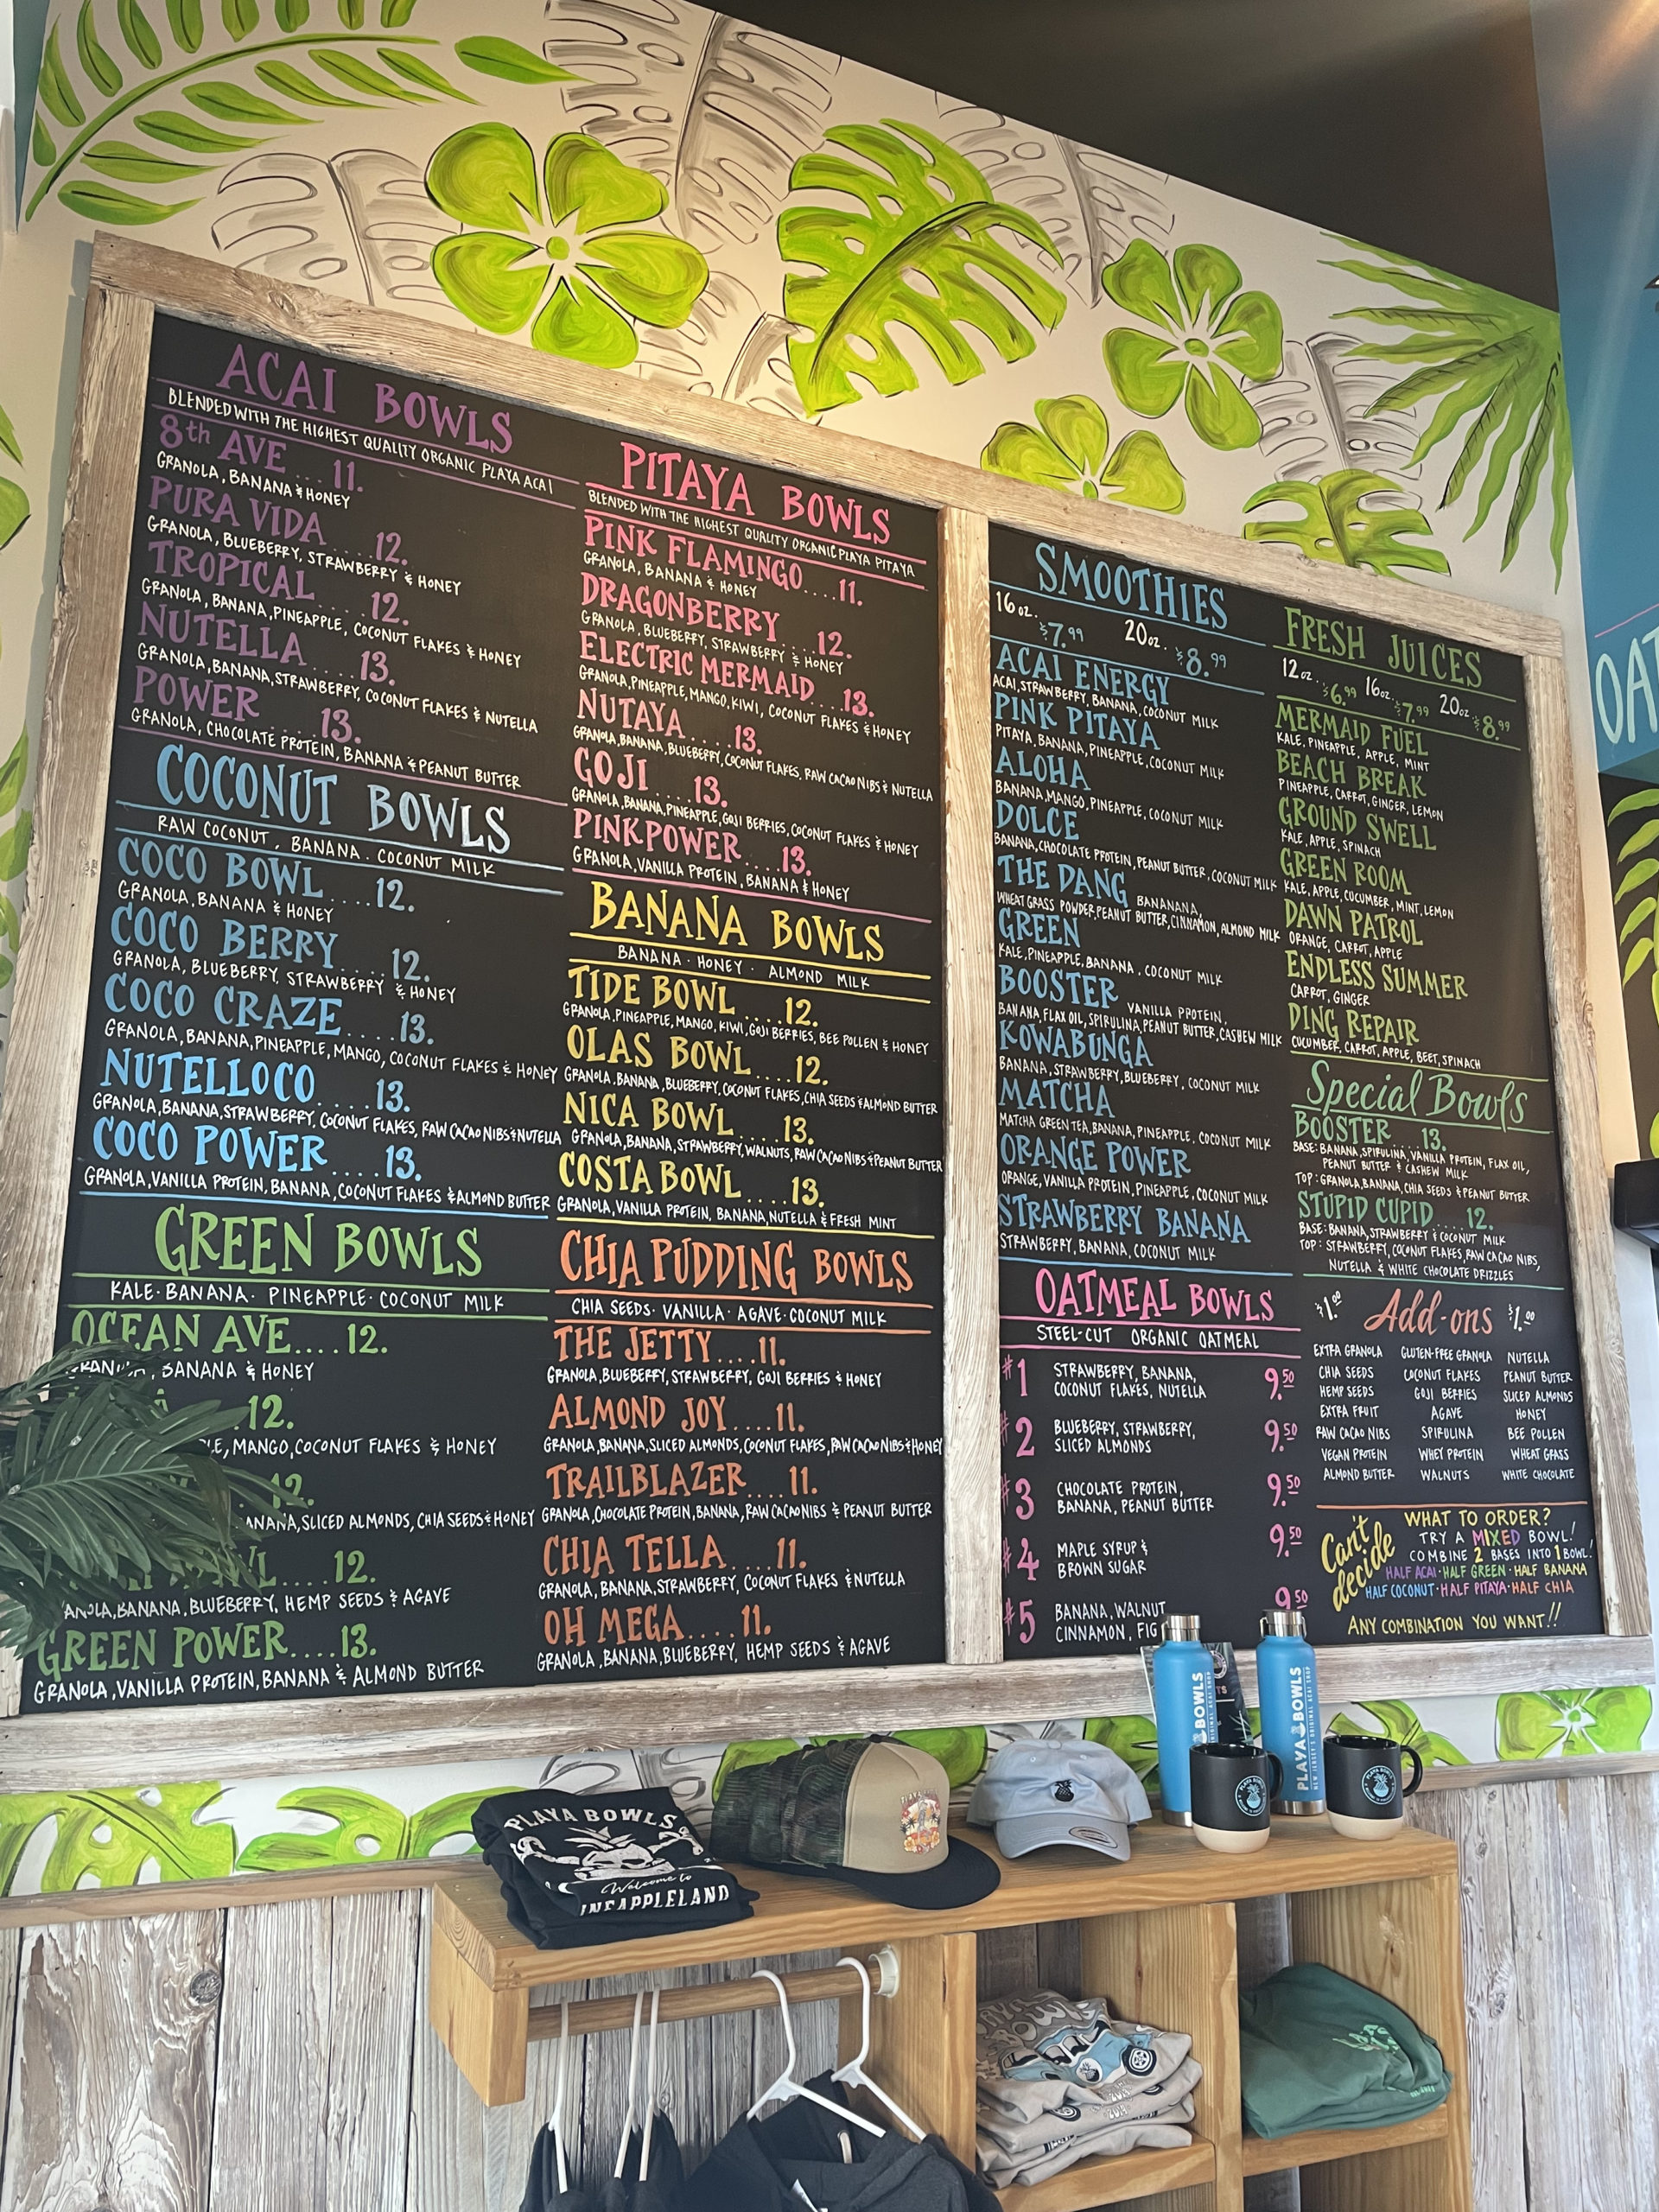 The Playa Bowl menu has a large variety of bowl bases including acai, coconut, green, pitaya, banana, chia seed pudding, along with smoothies, oatmeal bowls, and fresh juices. You’re guaranteed to find something you like, whether you’re in the mood for something sweet, tart, or savory, and if you can’t pick between two things, you have the option to order a mixed bowl, with your choice of any two bases on the menu.